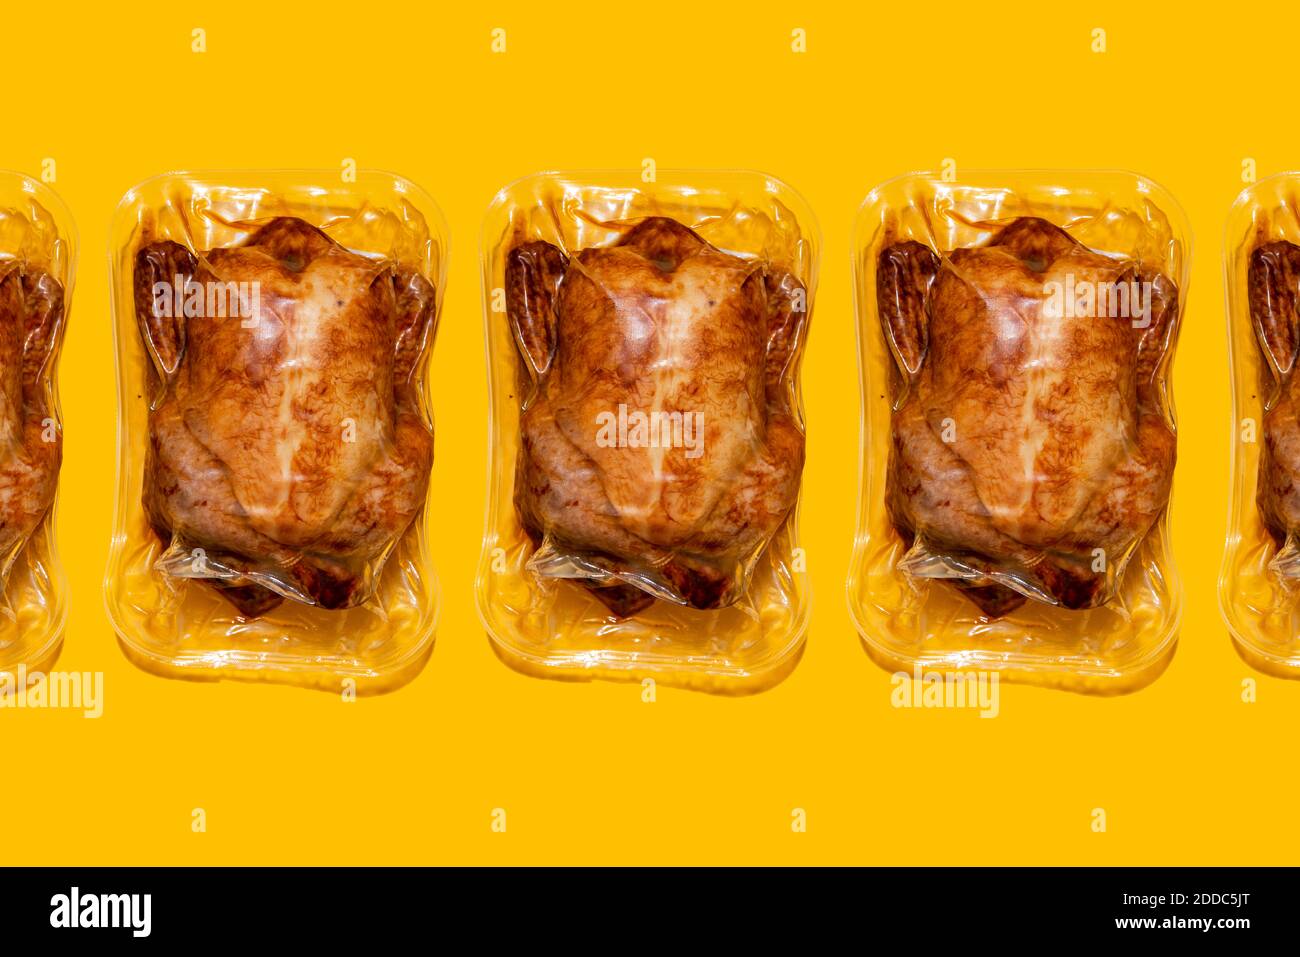 Vacuum packed roasted chickens arranged in a line on yellow background Stock Photo